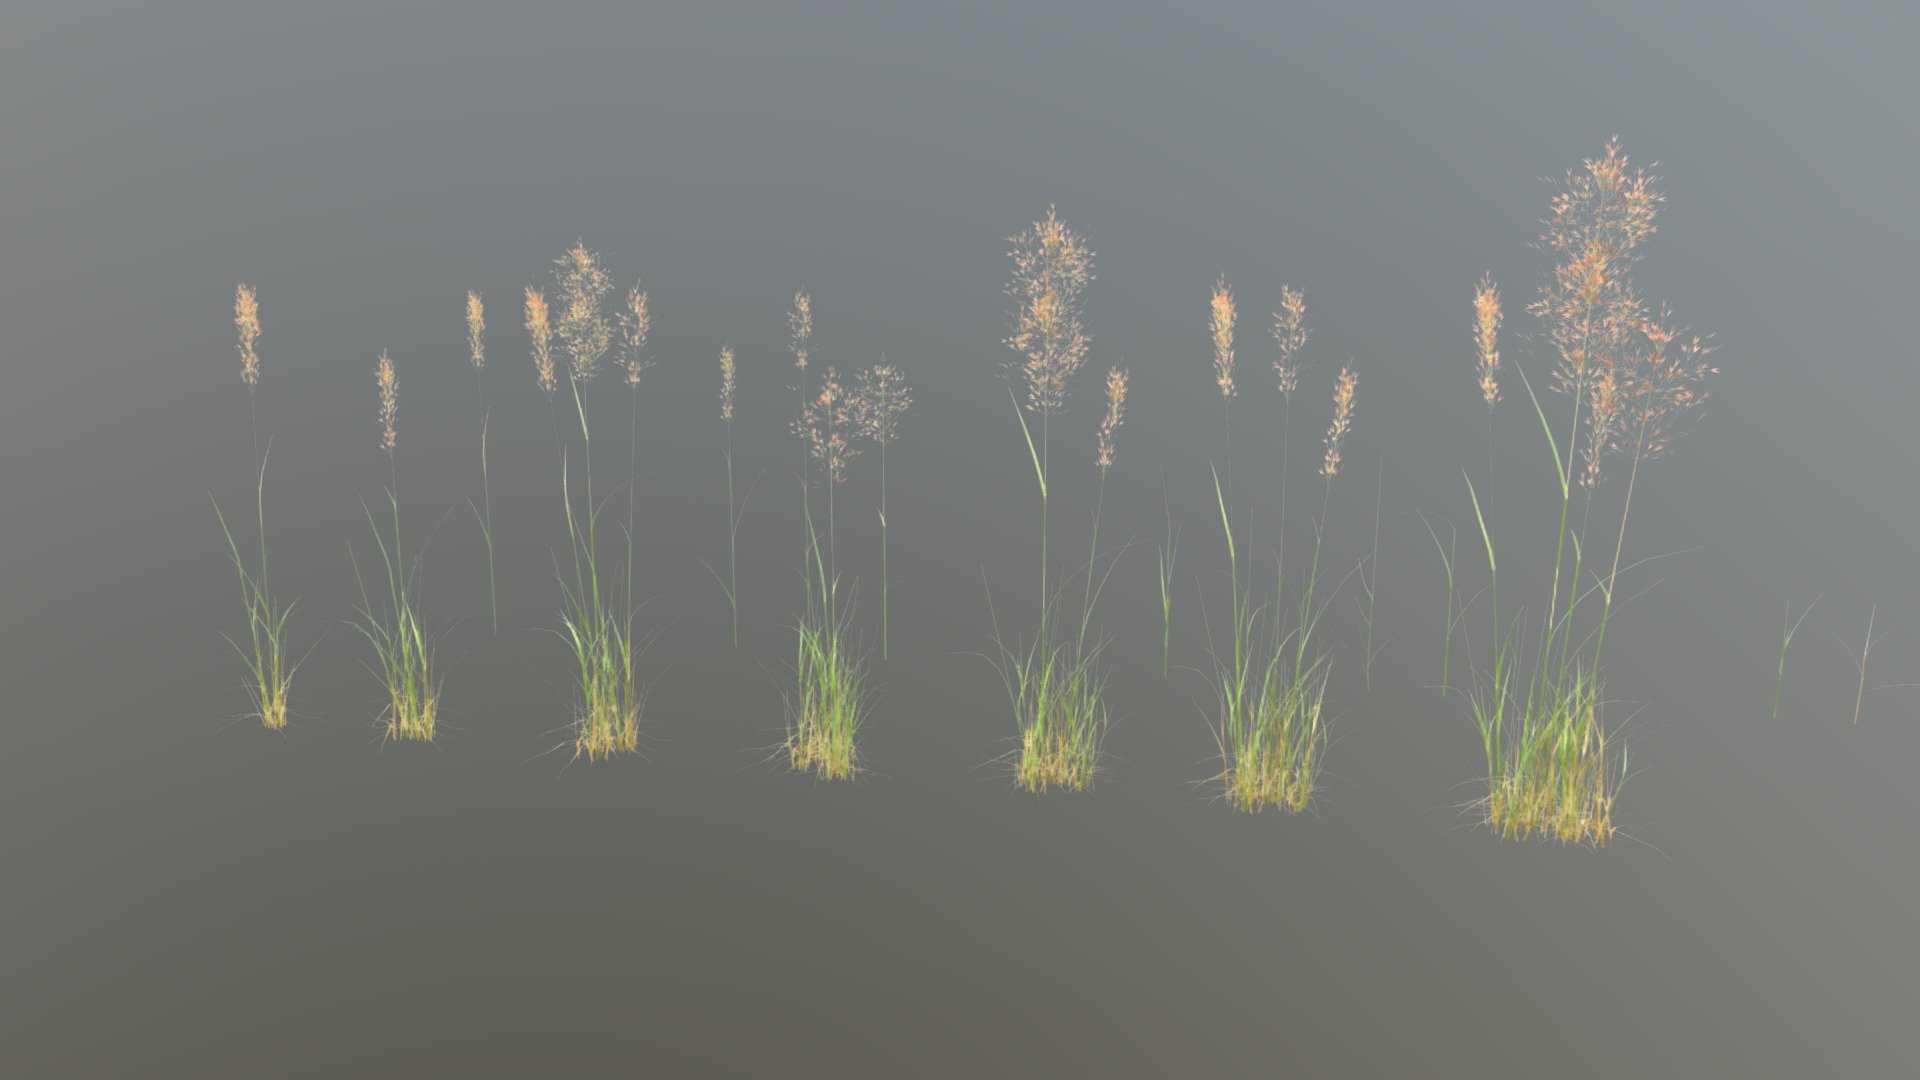 Hi all,

This is a model of bent grass (agrostis capillaris) asset created in Blender. It includes 5 different seedhead models, 6 different fresh grass blades, 6 different dry grass blades and 7 different clumps put together for easier distribution. It comes in following formats:

.blend

.fbx

.obj

The blender files have the shaders set up, so they are ready to render using Cycles.

It also comes with set of .jpg maps 3d model